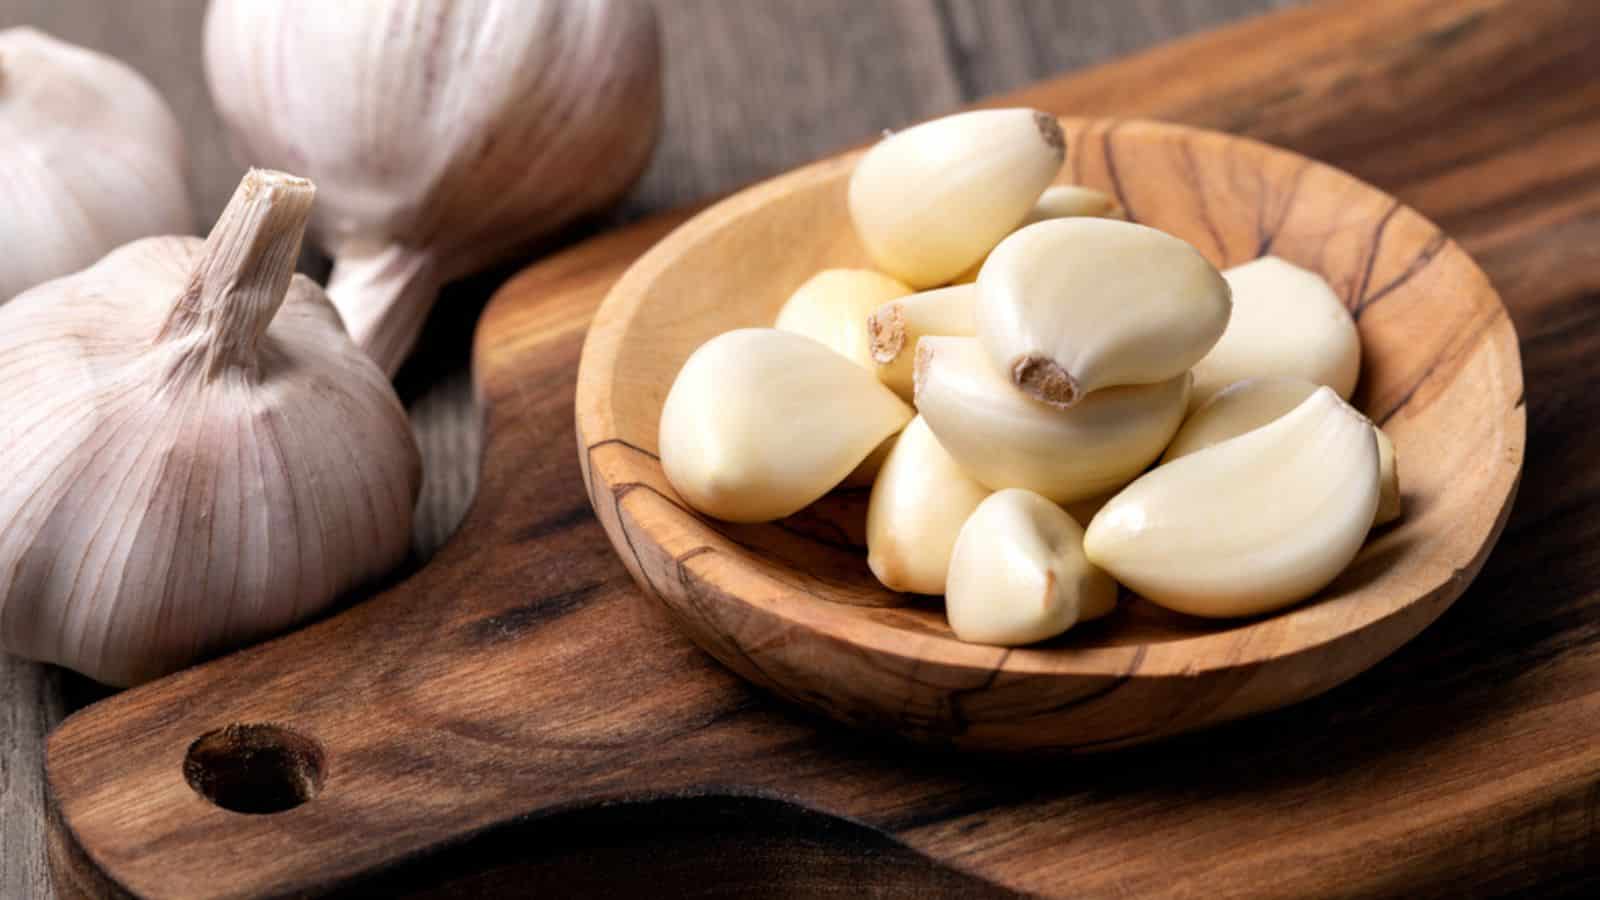 Garlic Cloves and Bulb in vintage wooden bowl